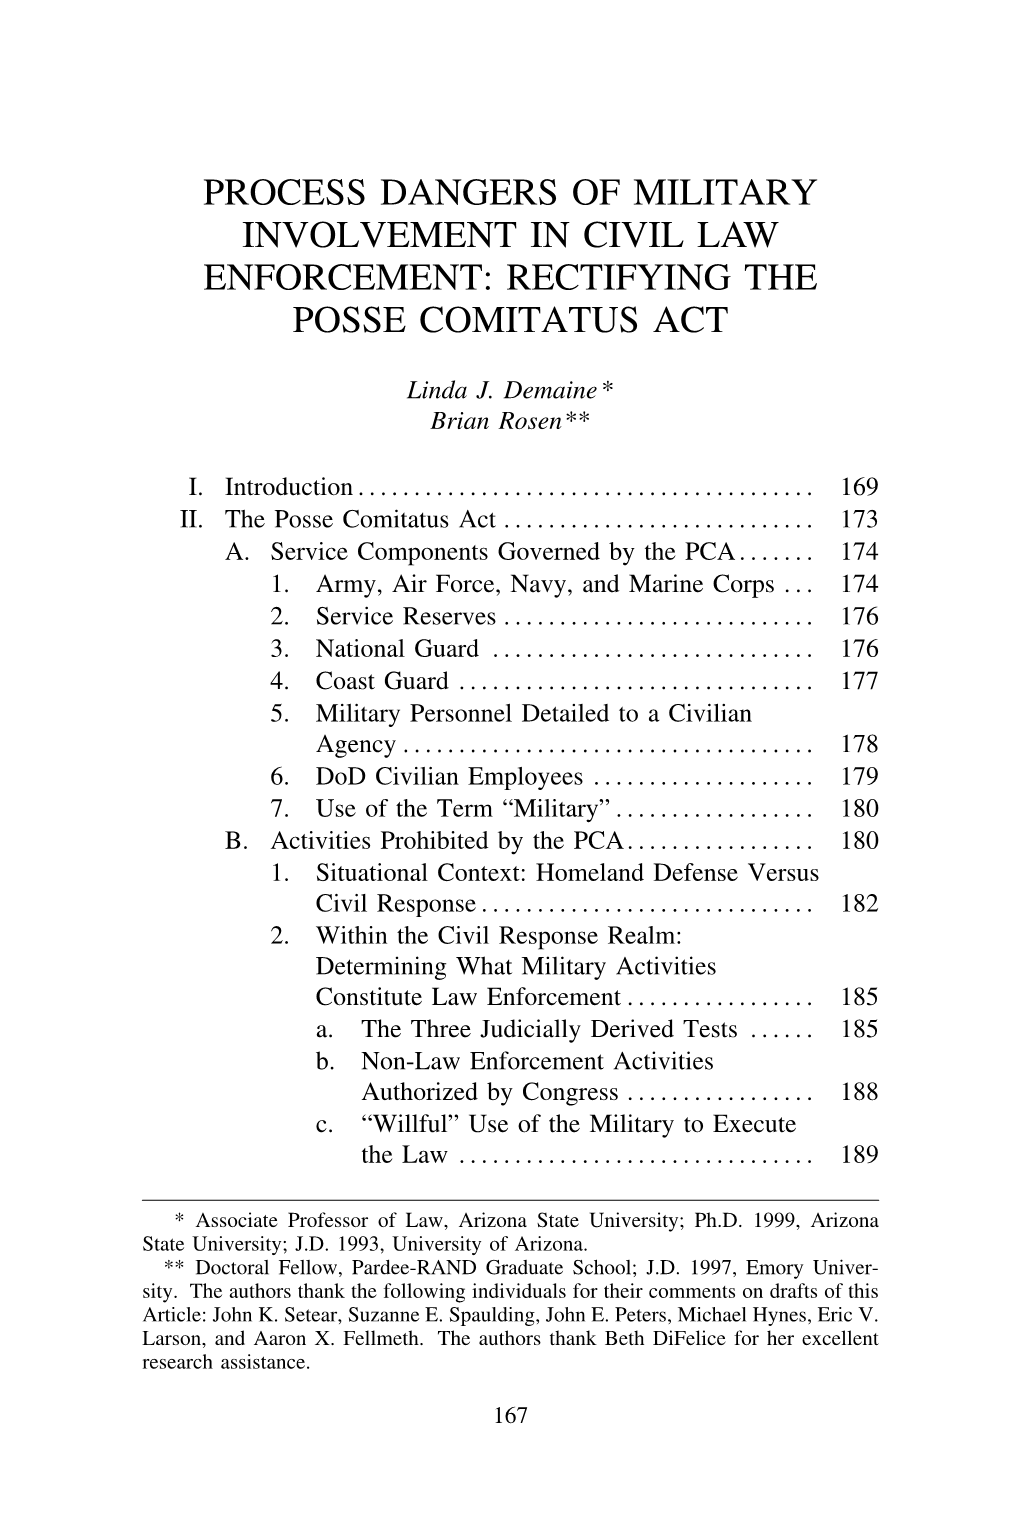 Process Dangers of Military Involvement in Civil Law Enforcement: Rectifying the Posse Comitatus Act